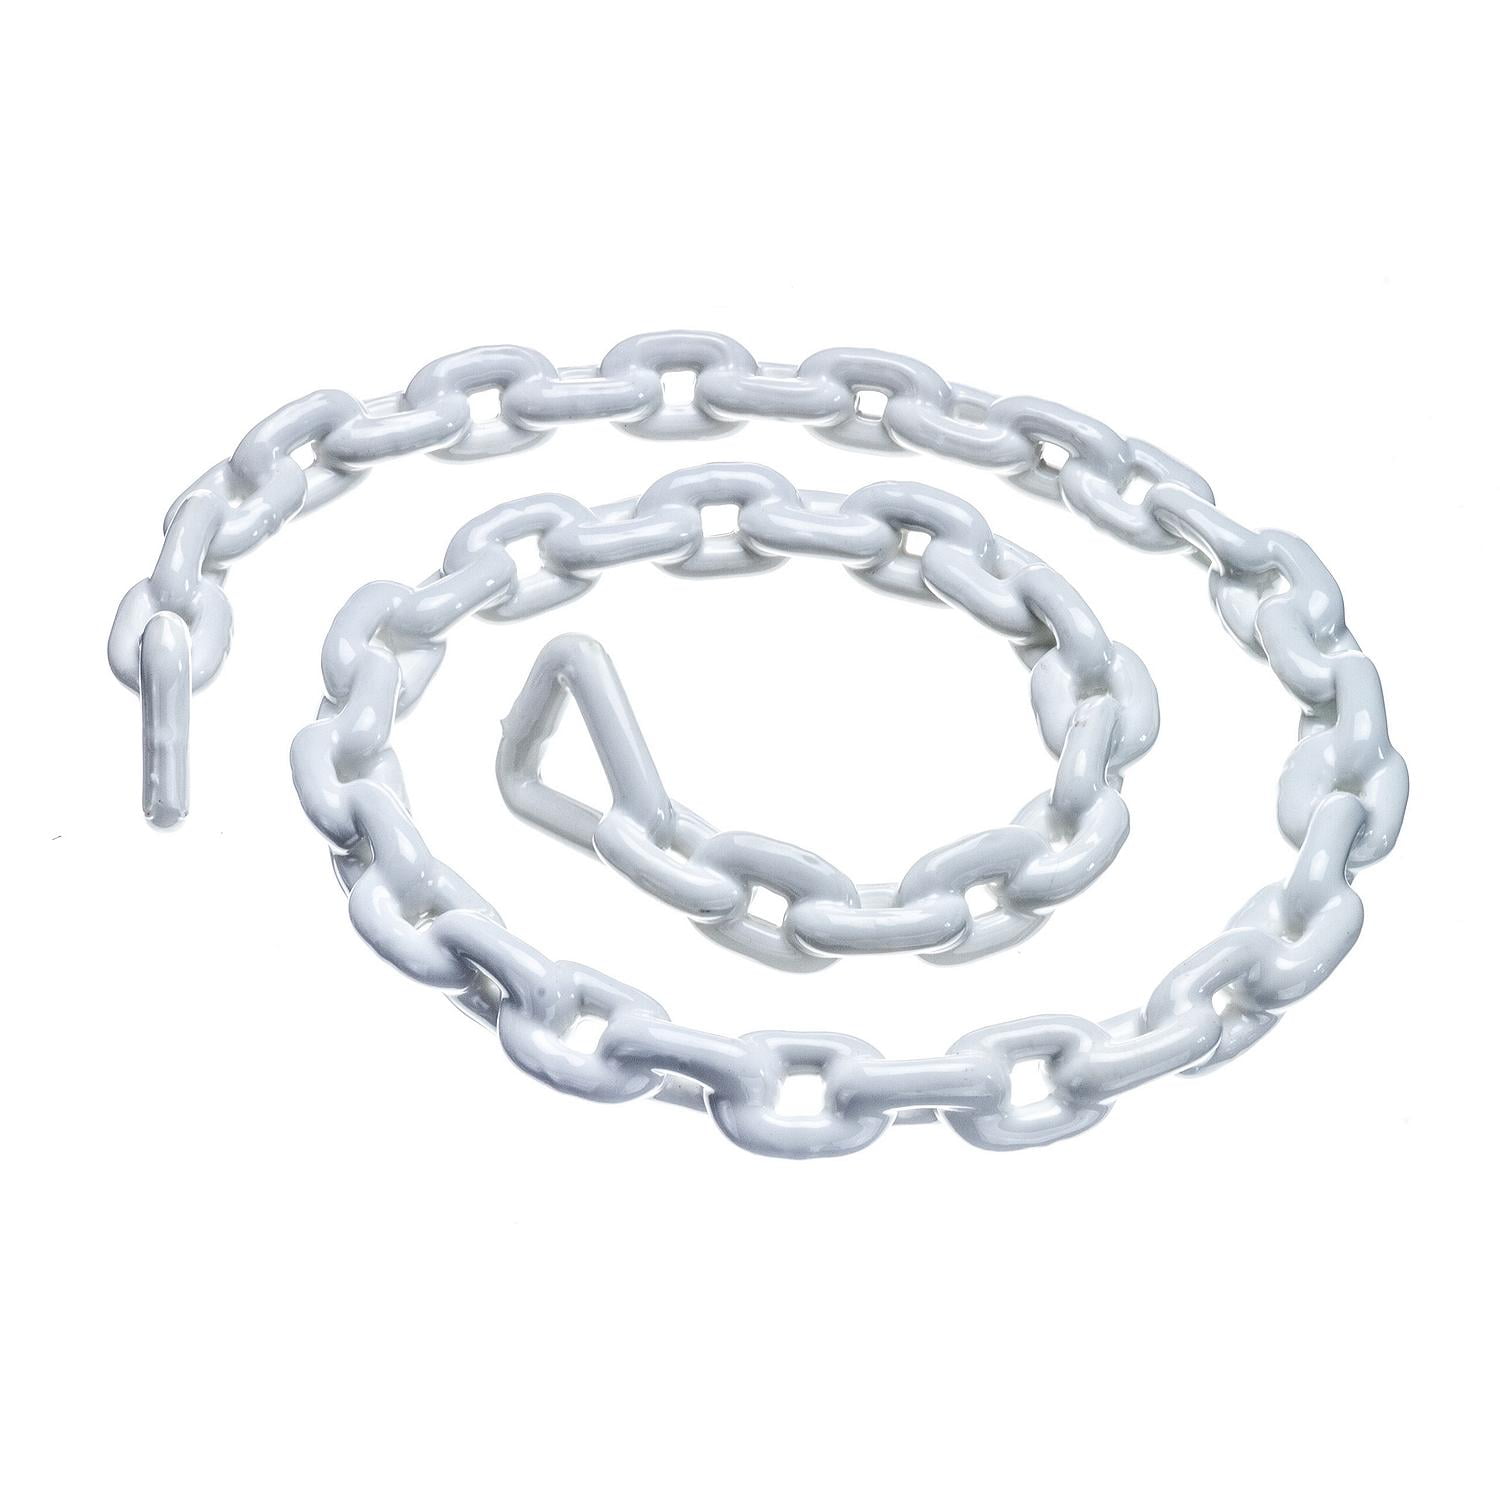 Rope Chain Pulls Stainless Steel Handles